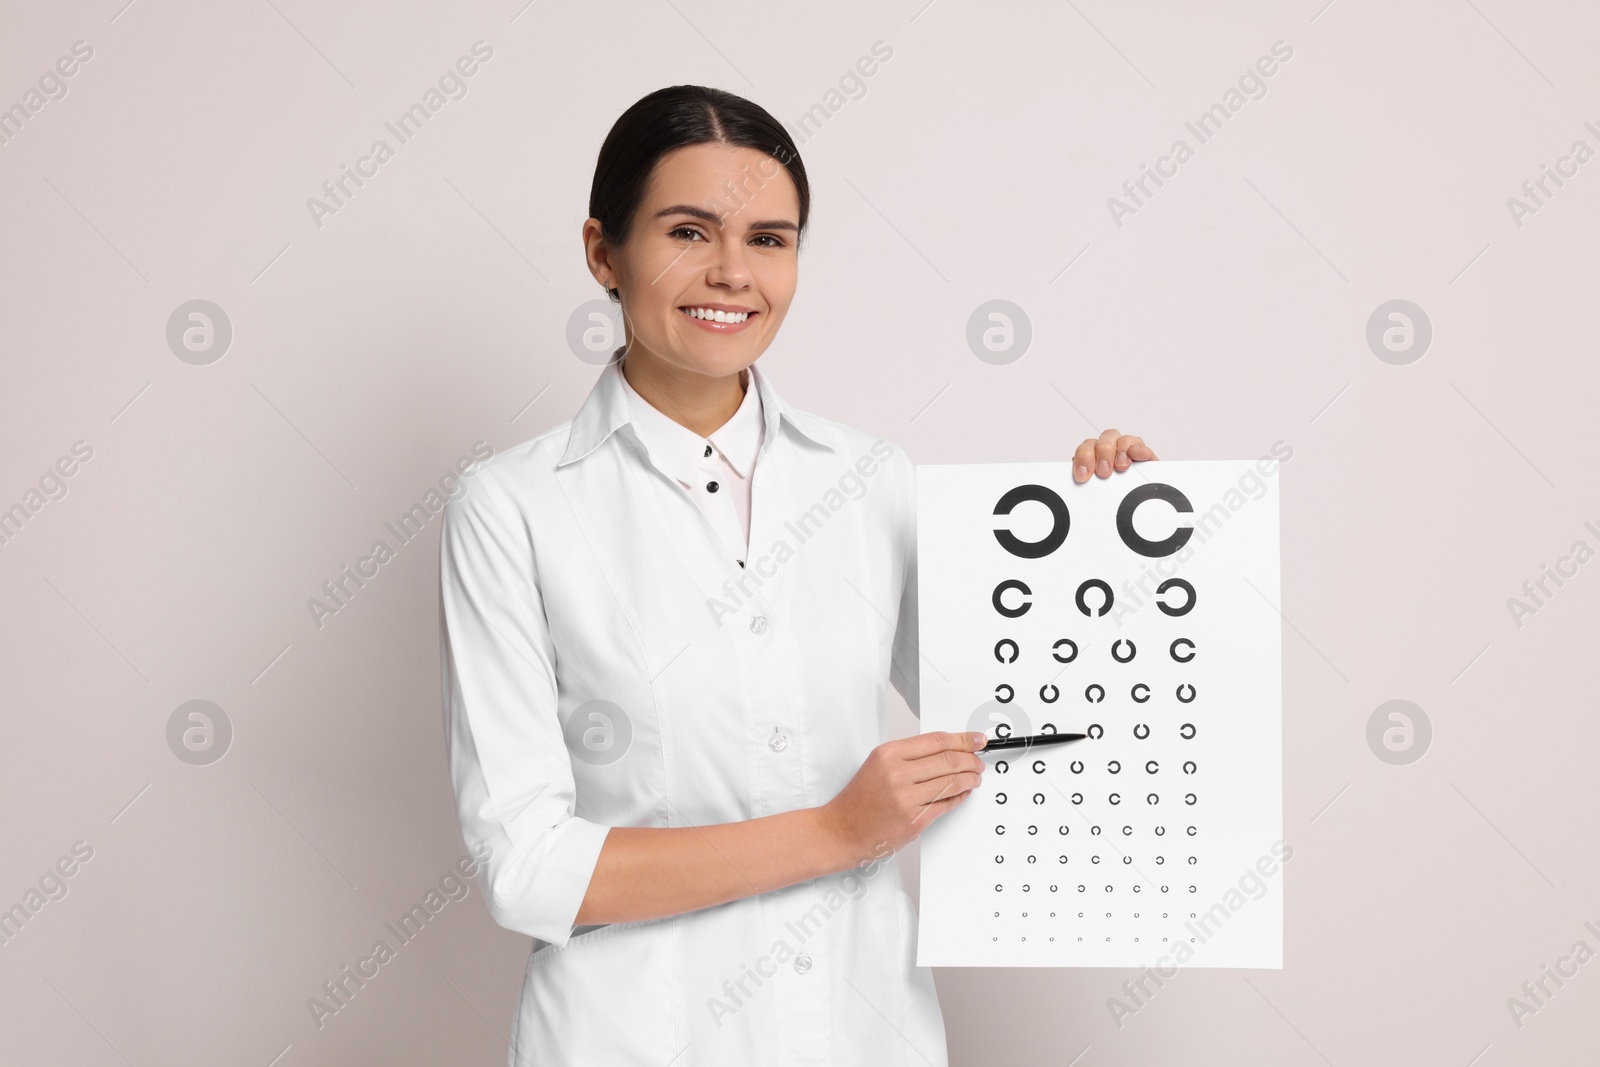 Photo of Ophthalmologist pointing at vision test chart on light background